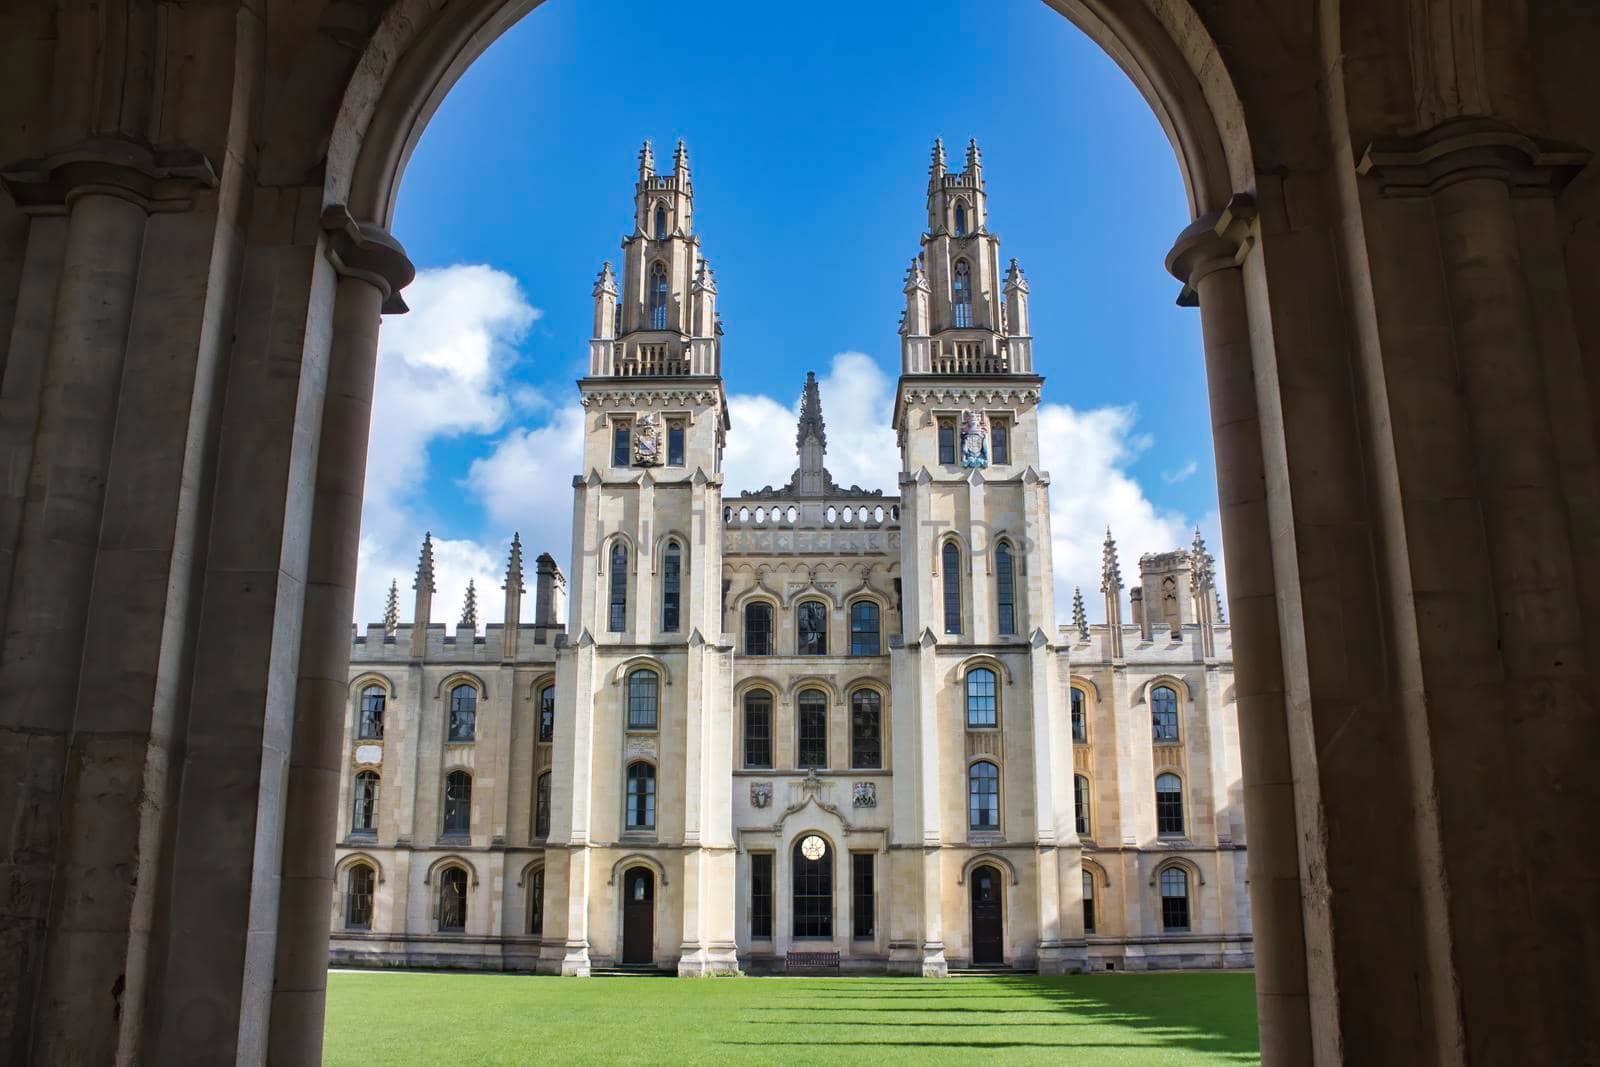 All Souls college, Oxford university - front view of entrance with towers and the green lawn from an archway by tennesseewitney